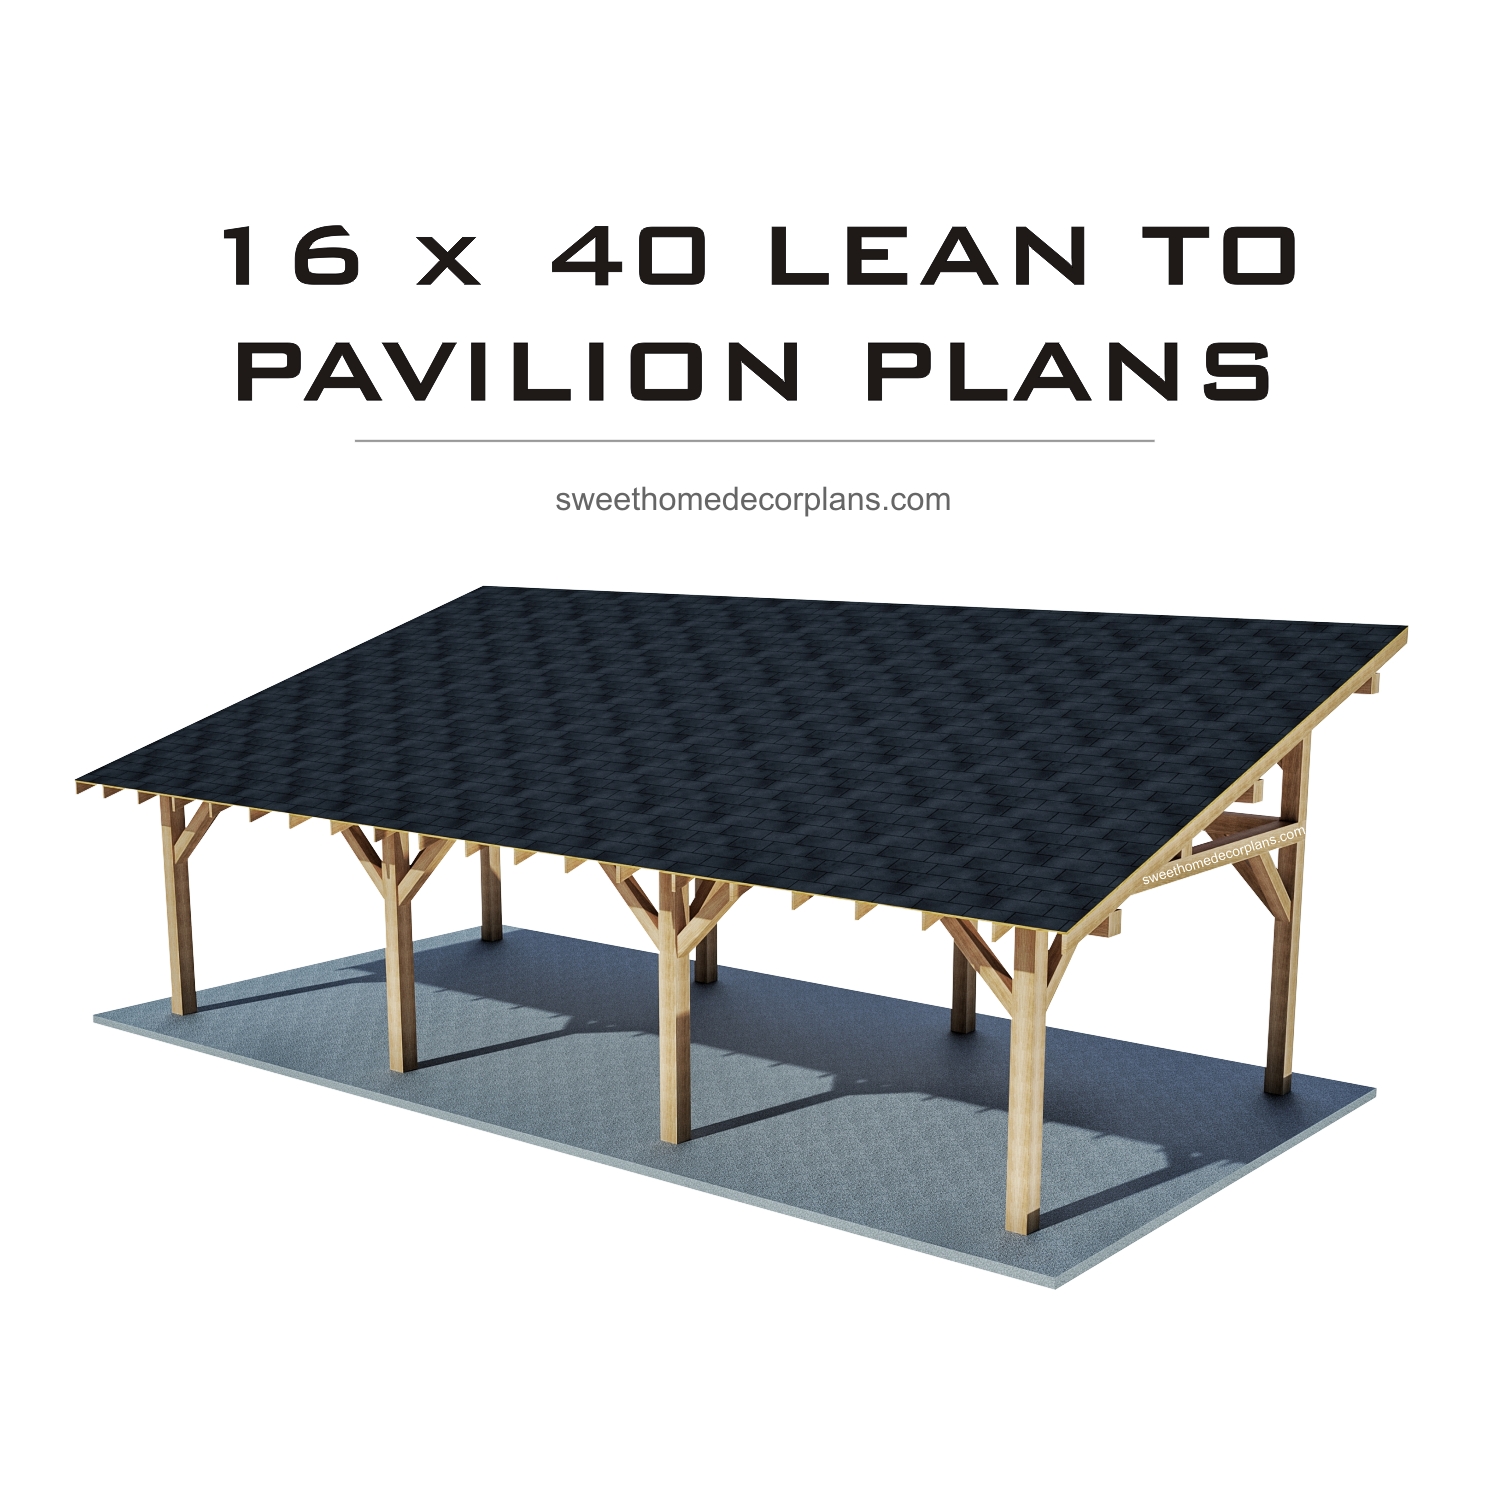 Diy-wooden-16-x-40-lean-to-pavilion-plans-in-pdf-for-outdoor